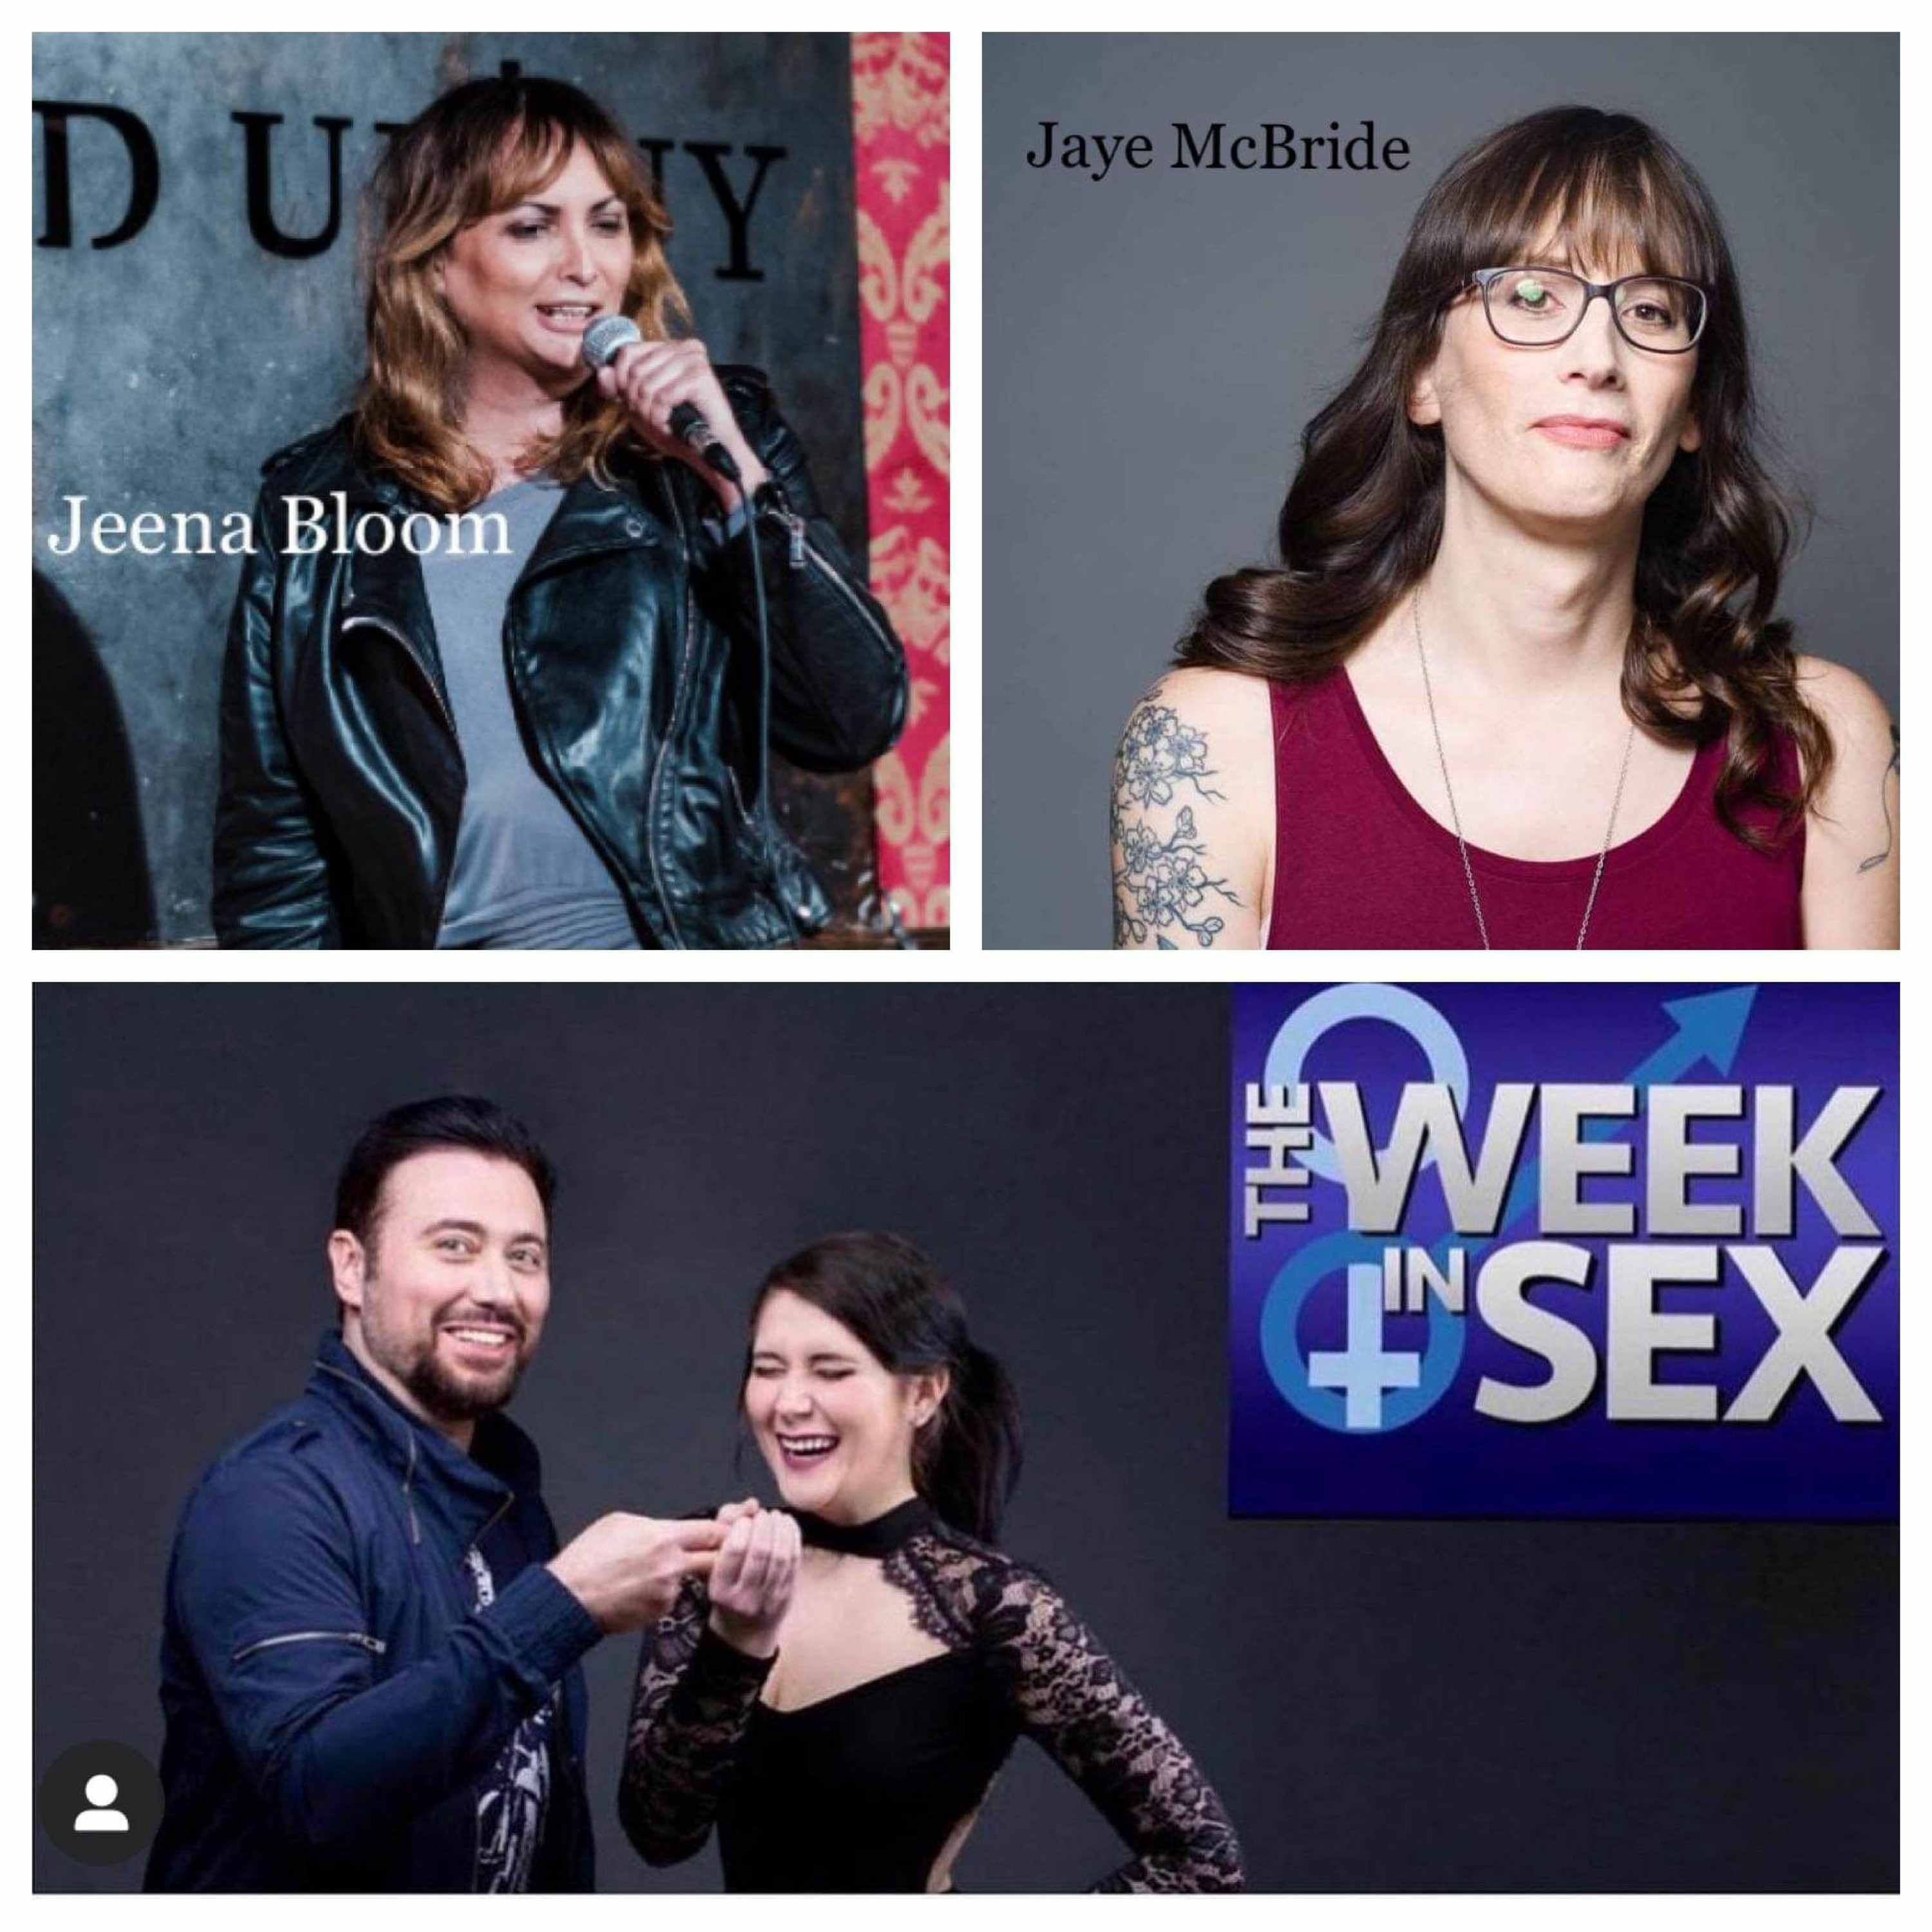 The Week In Sex - S6 E11 Jaye McBride and Jeena Bloom Discuss The Chappelle Special with Allan and Keanu